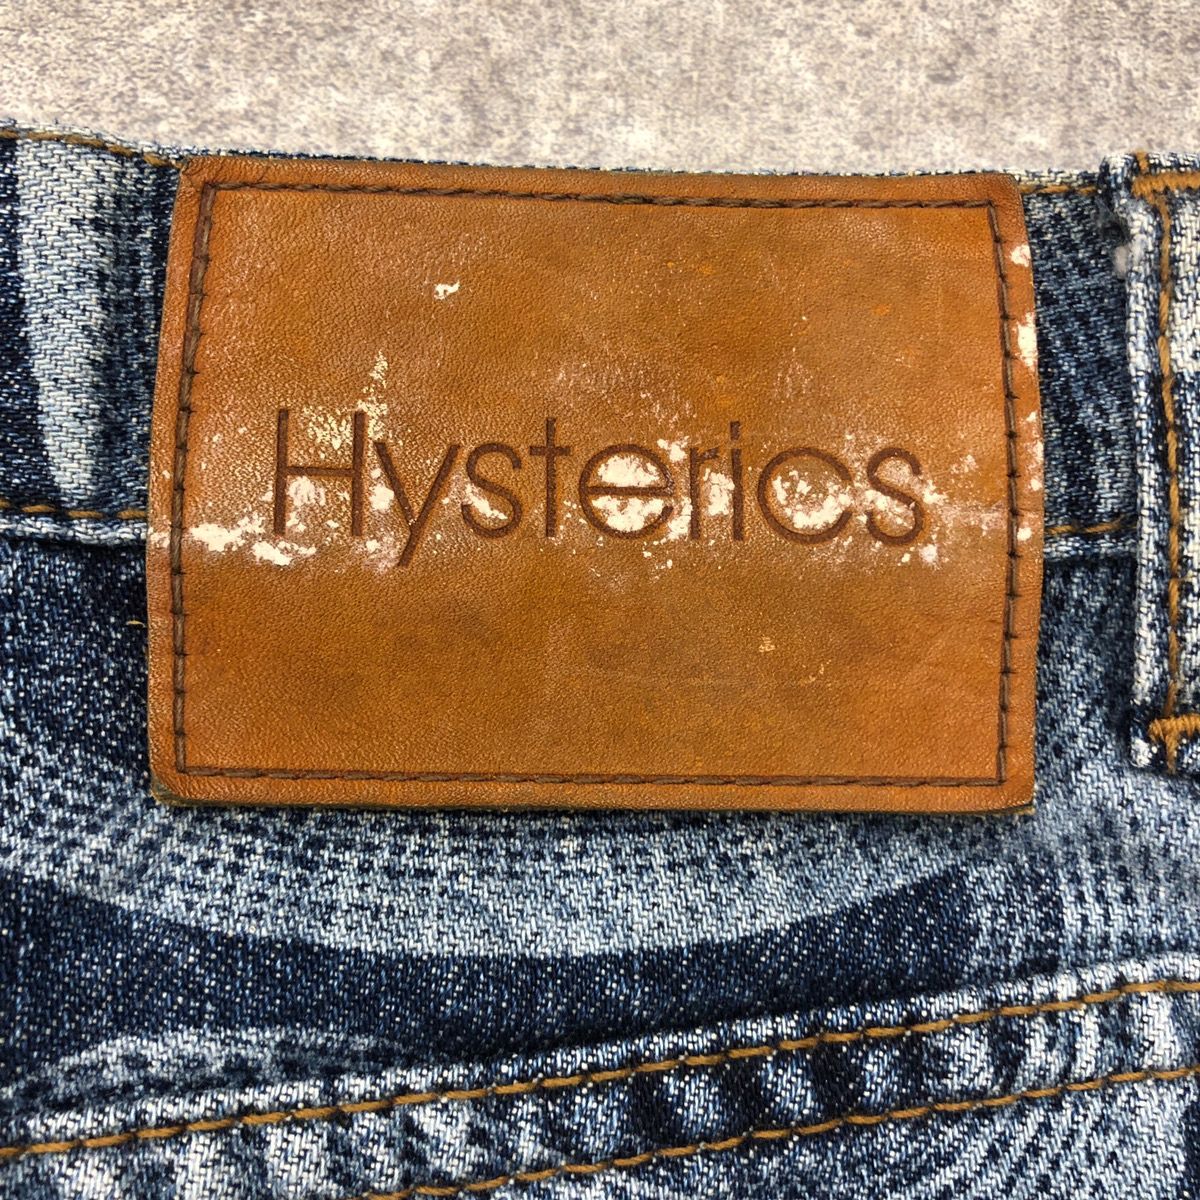 Hysteric glamour ヒステリックグラマー スカート スネーク柄 ヘビ 膝